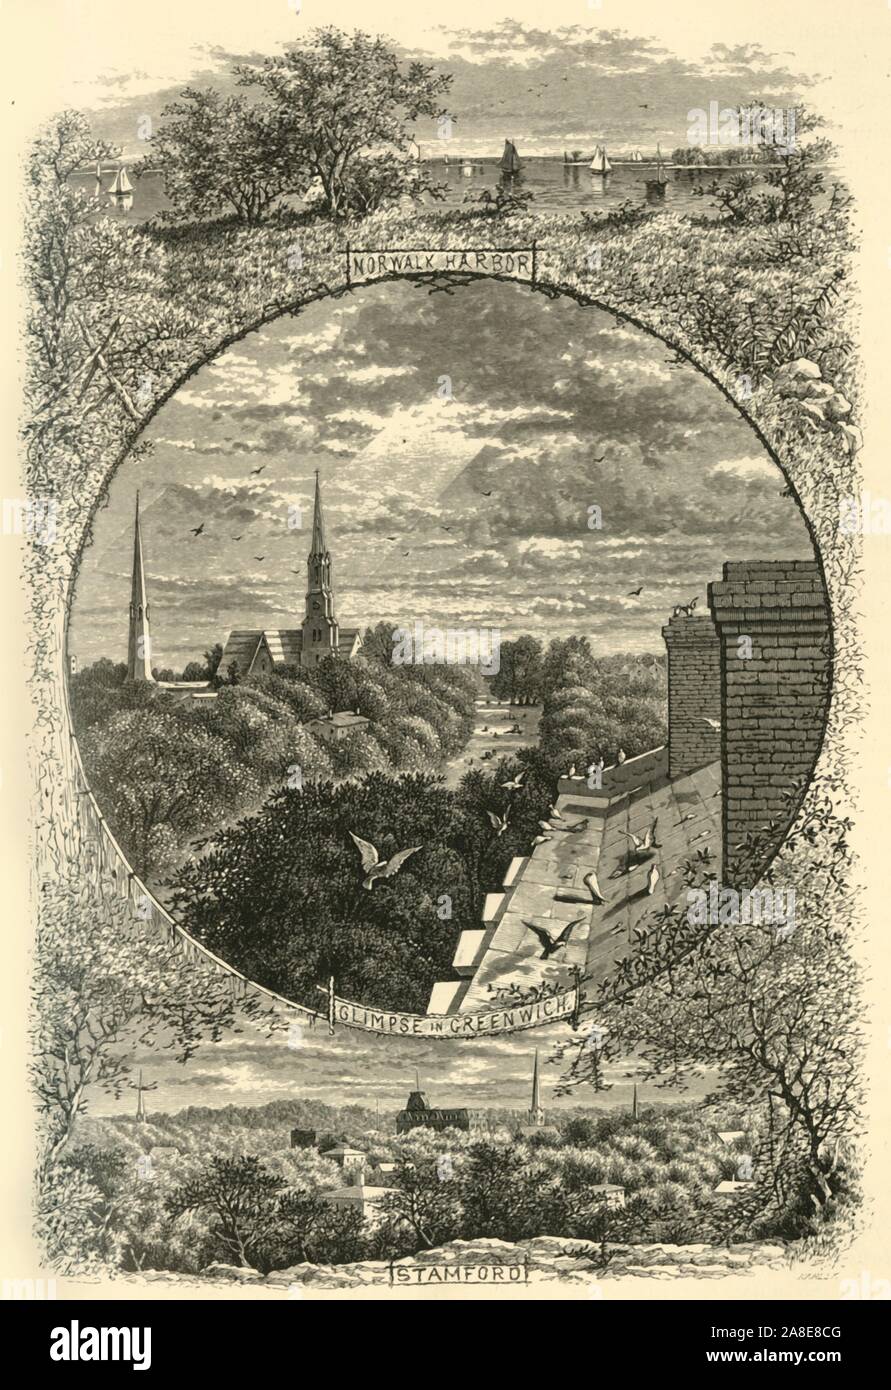 'Glimpses of Greenwich, Stamford, and Norwalk', 1874. 'Norwalk Harbor, Glimpse in Greenwich, Stamford', Connecticut, USA. 'About twenty miles from our great commercial metropolis lies the first station on the Connecticut shore, that of Greenwich, a very attractive village, occupying finely-wooded slopes just north of the station. Its antiquity is unquestionable; for, two centuries and a quarter ago, it was designated by the Dutch-English Commission, in convention at Hartford, as the western limit of the province of Connecticut'. From &quot;Picturesque America; or, The Land We Live In, A Deline Stock Photo